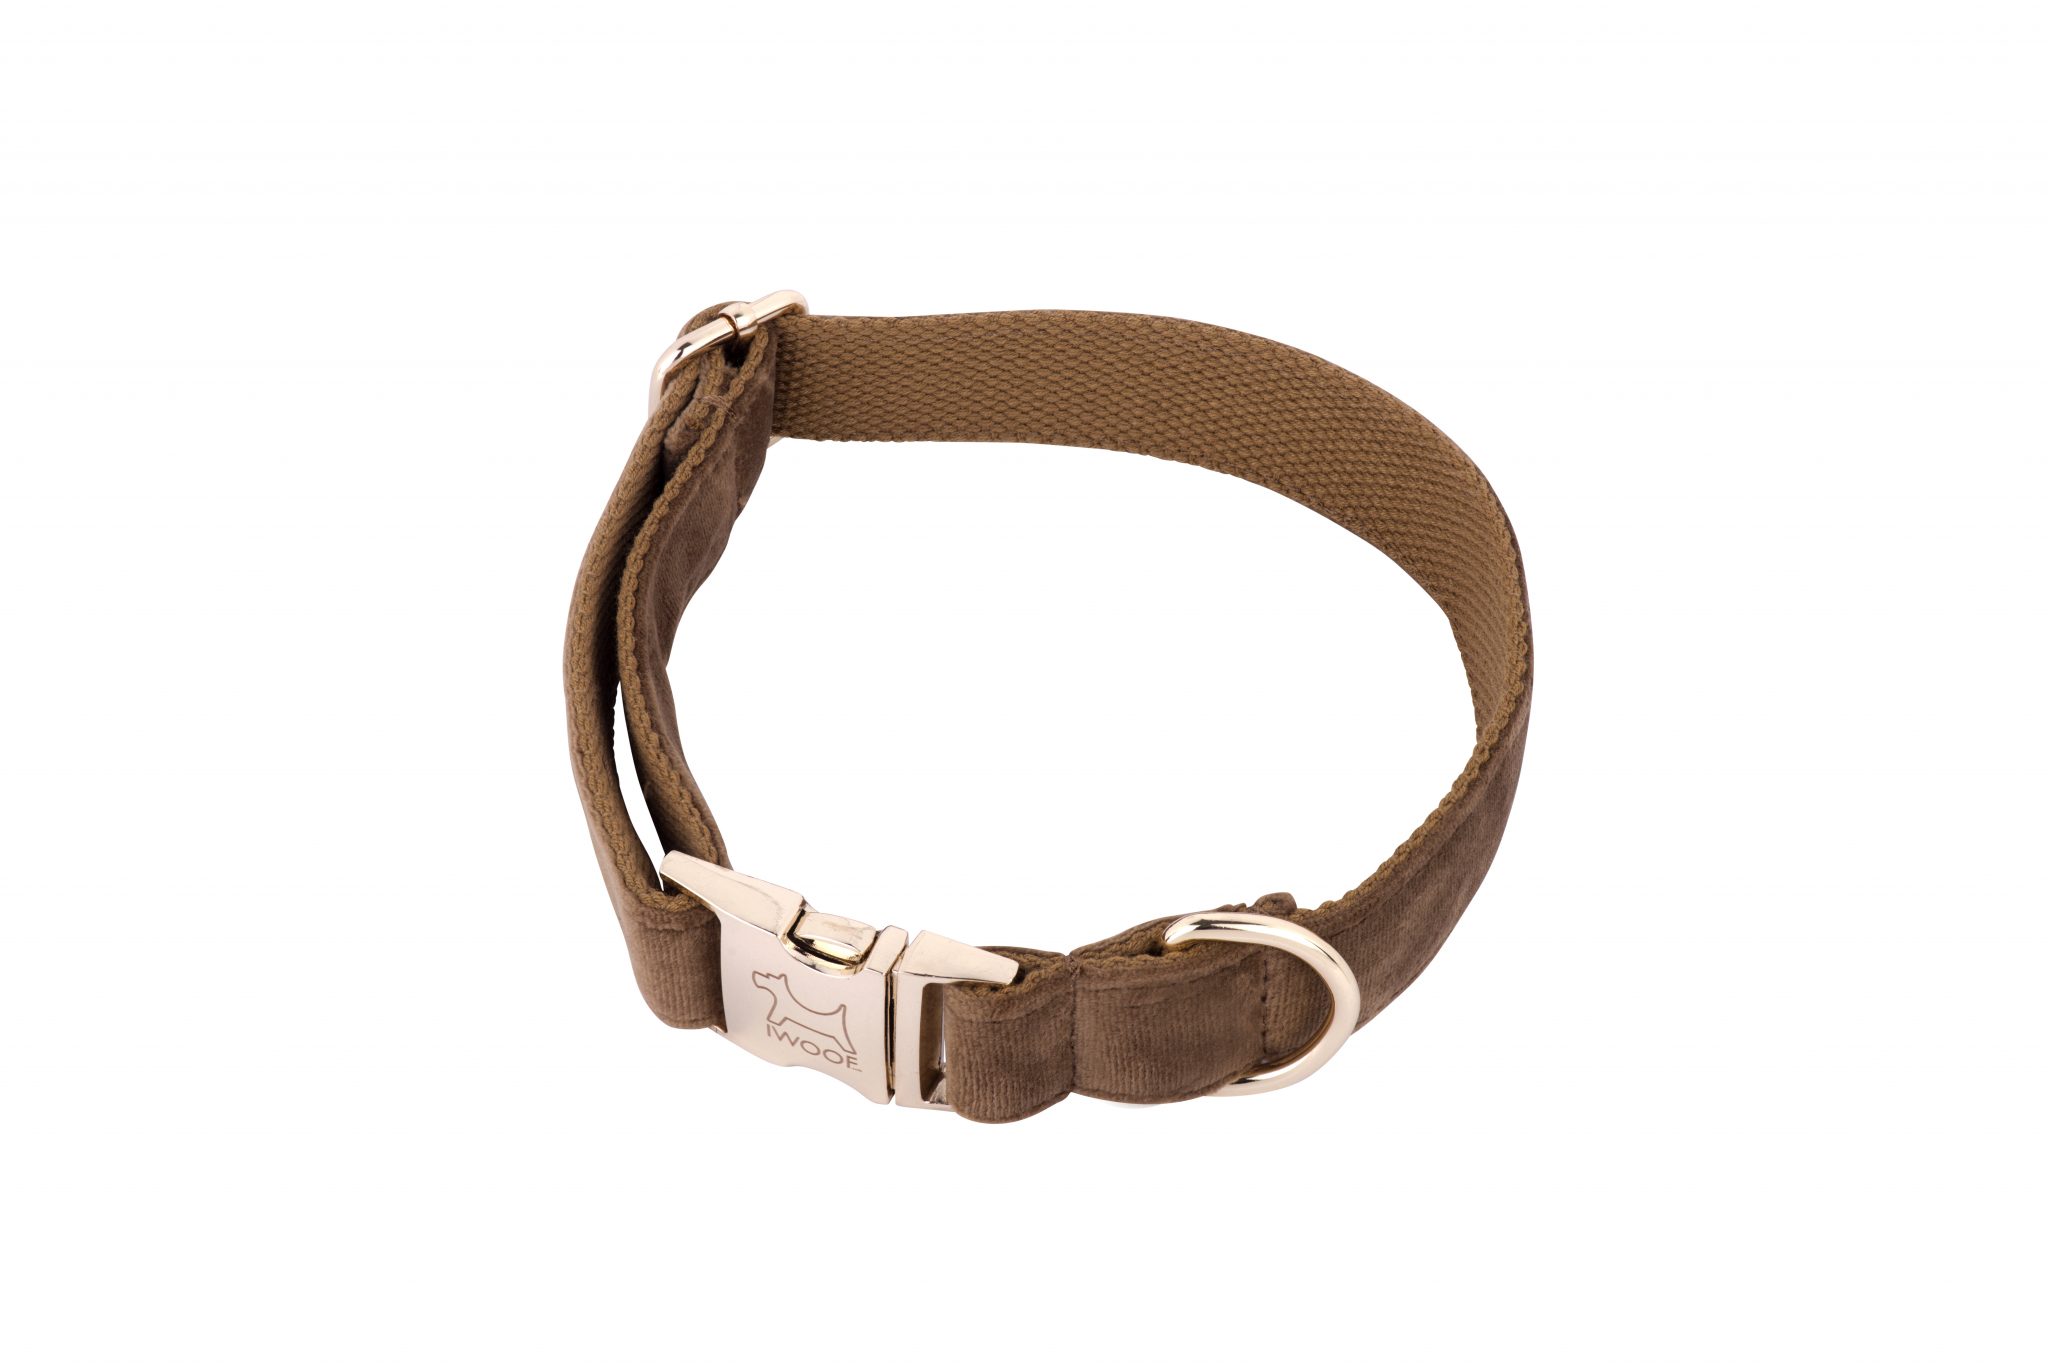 Cappuccino designer dog collar by IWOOF